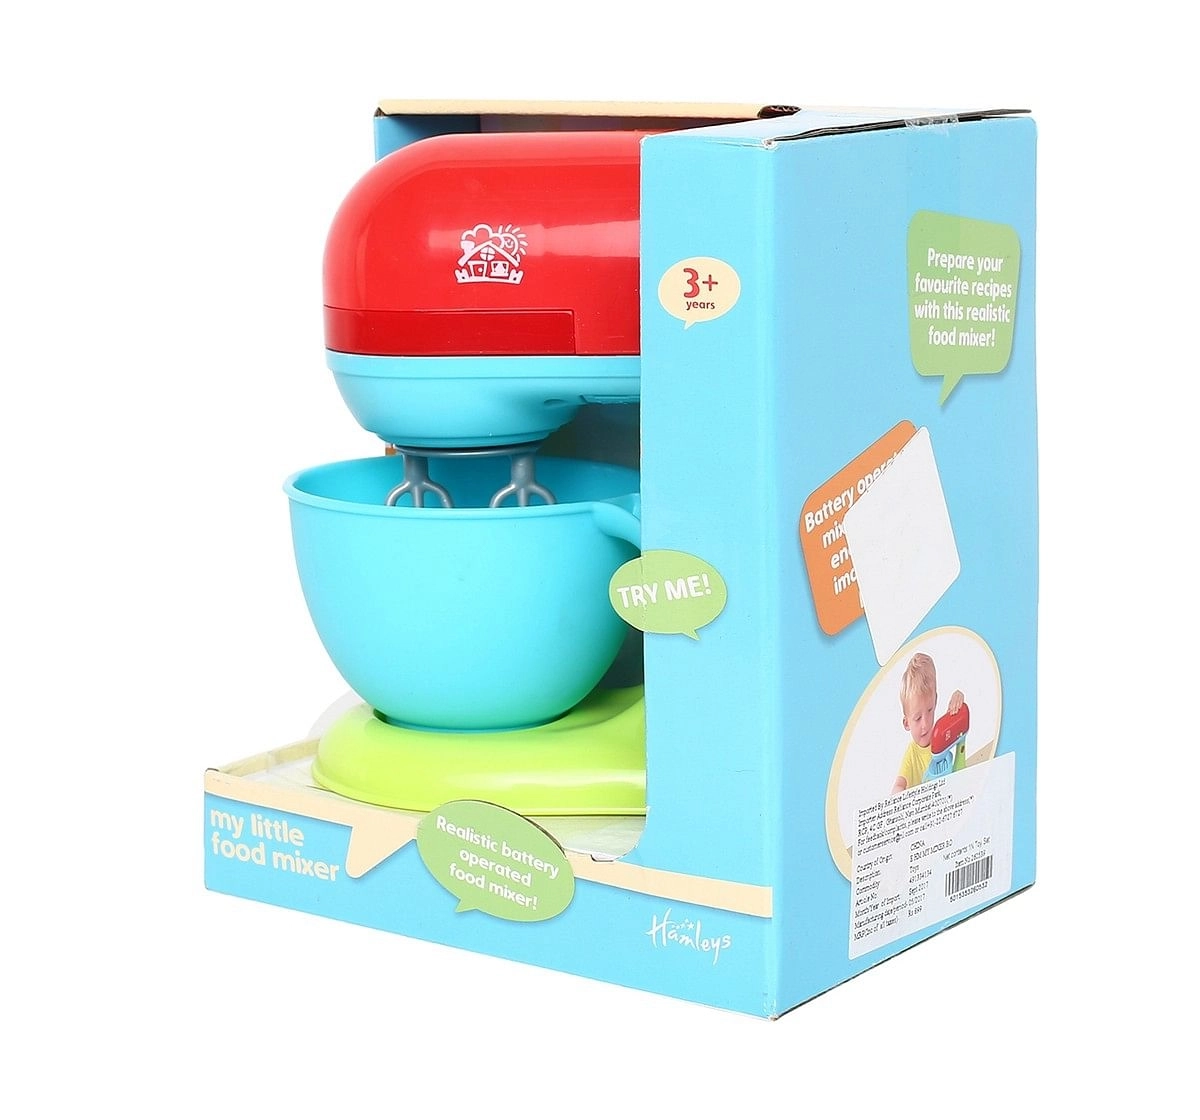  Hamleys Play Time Food Mixer Toy Kitchen Sets & Appliances for age 3Y+ 